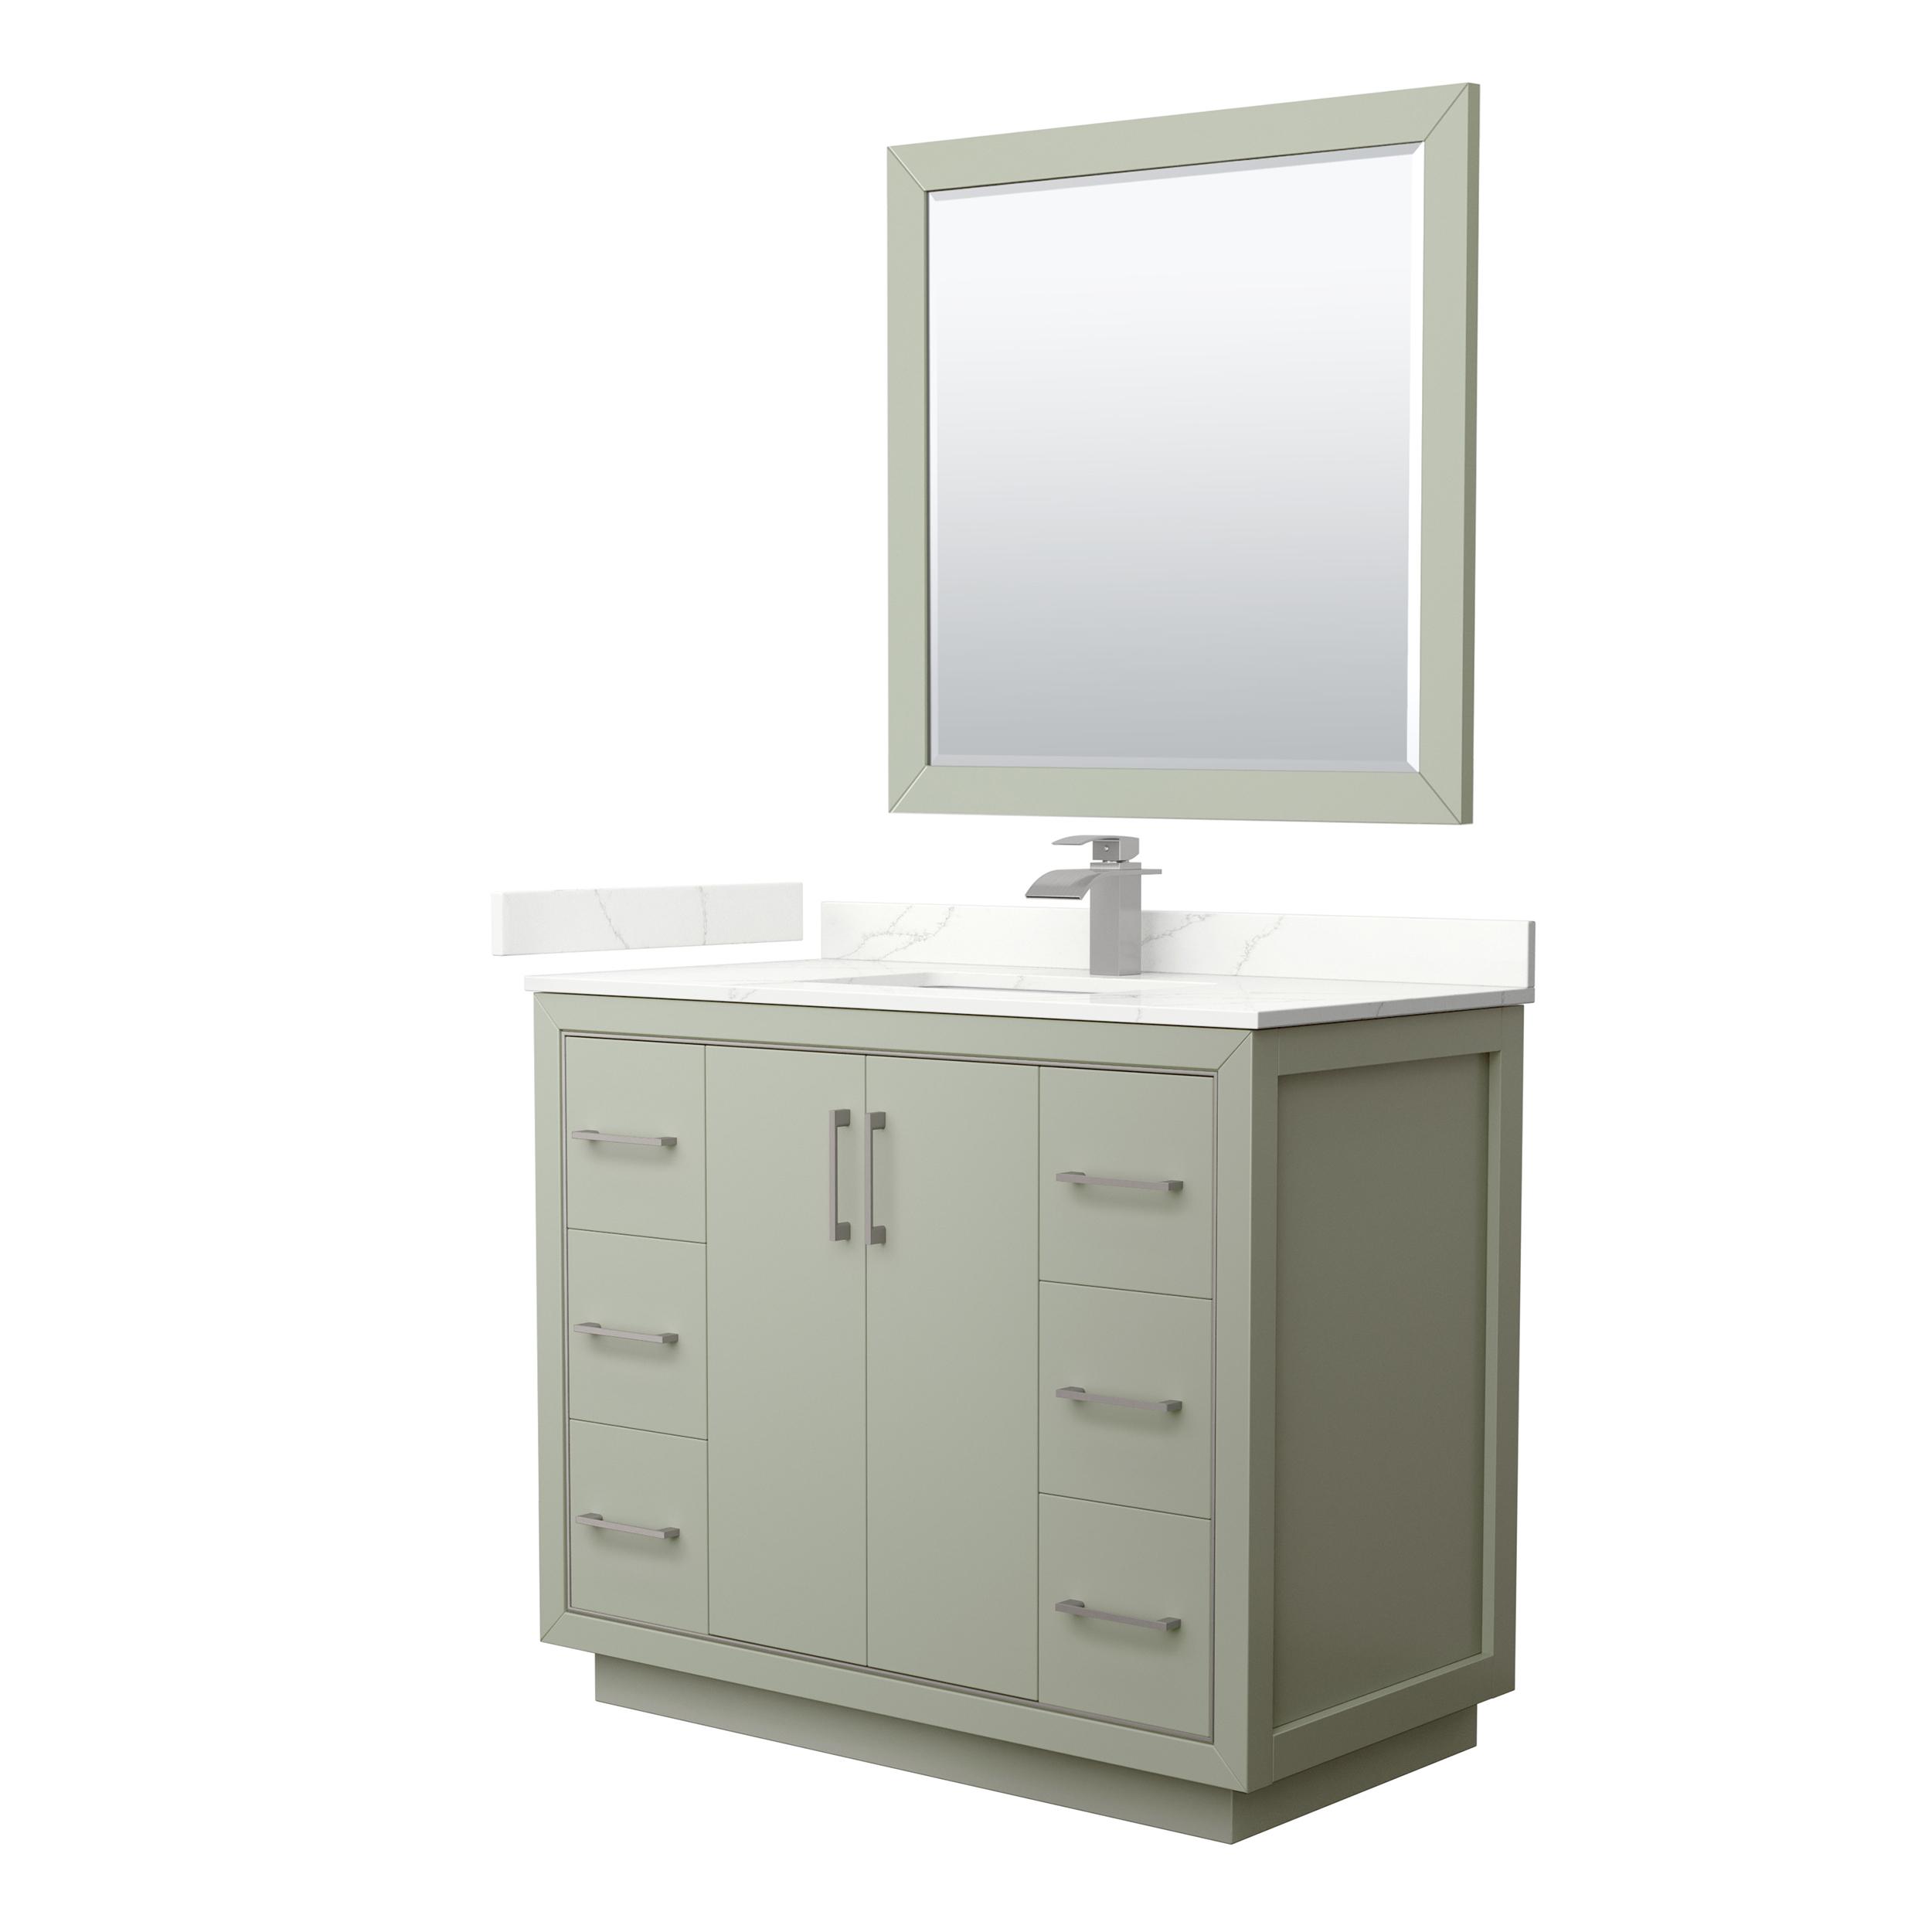 icon 42" single vanity with optional quartz or carrara marble counter - light green